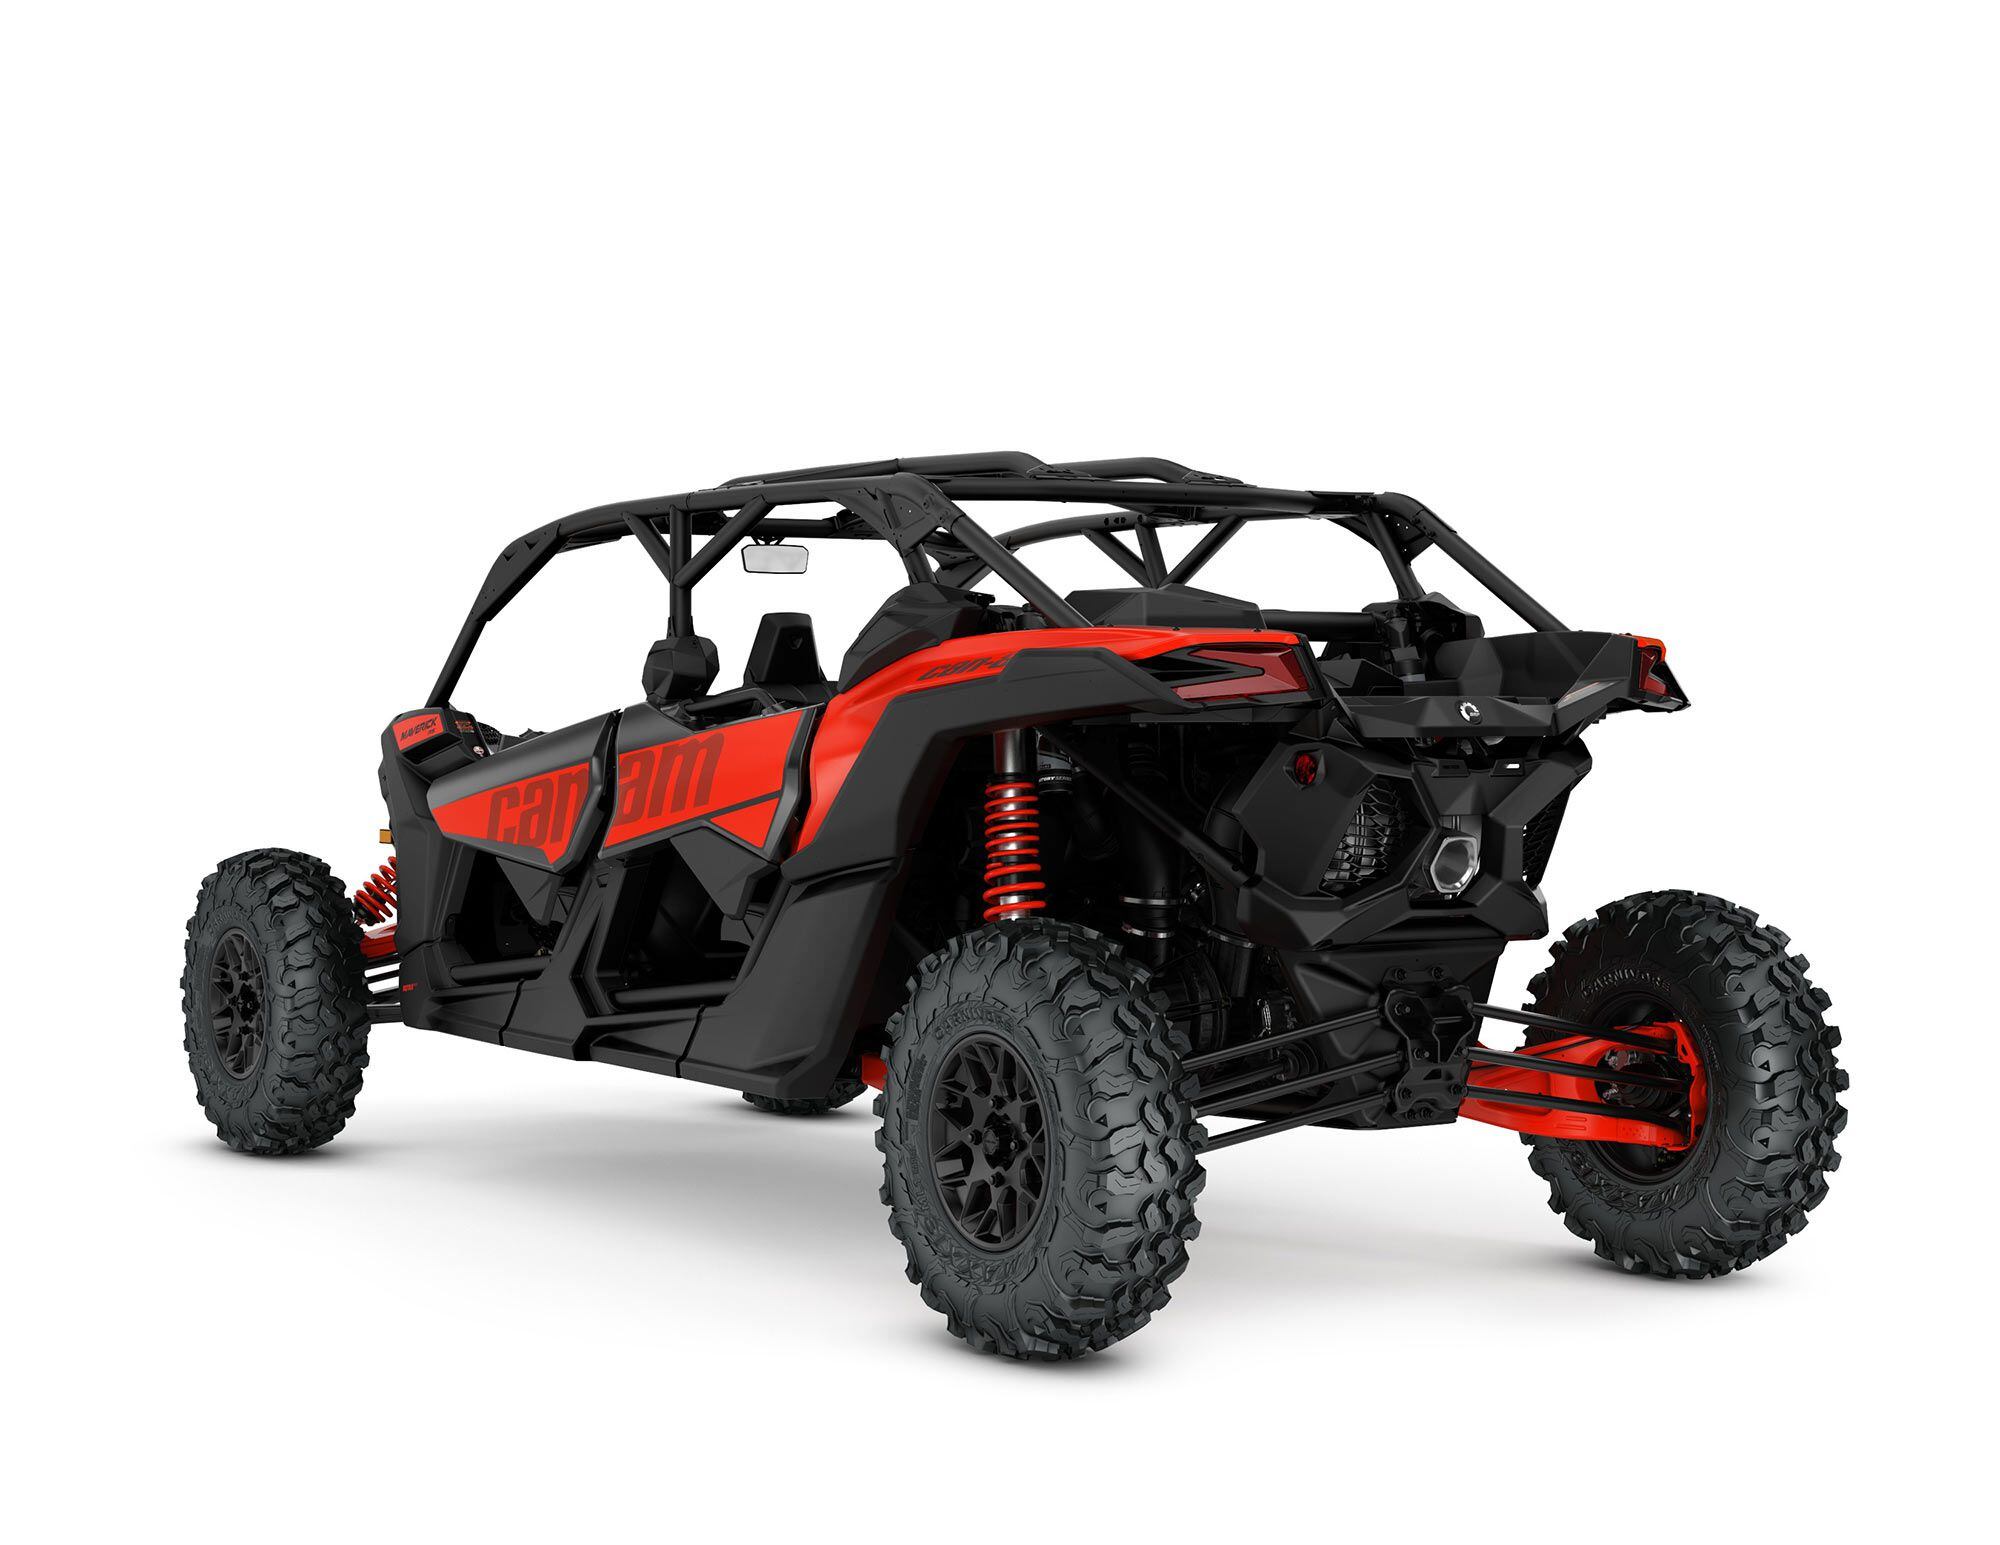 2022 Can-Am Maverick X3 Max RS Turbo RR rear view in Can-Am Red color.